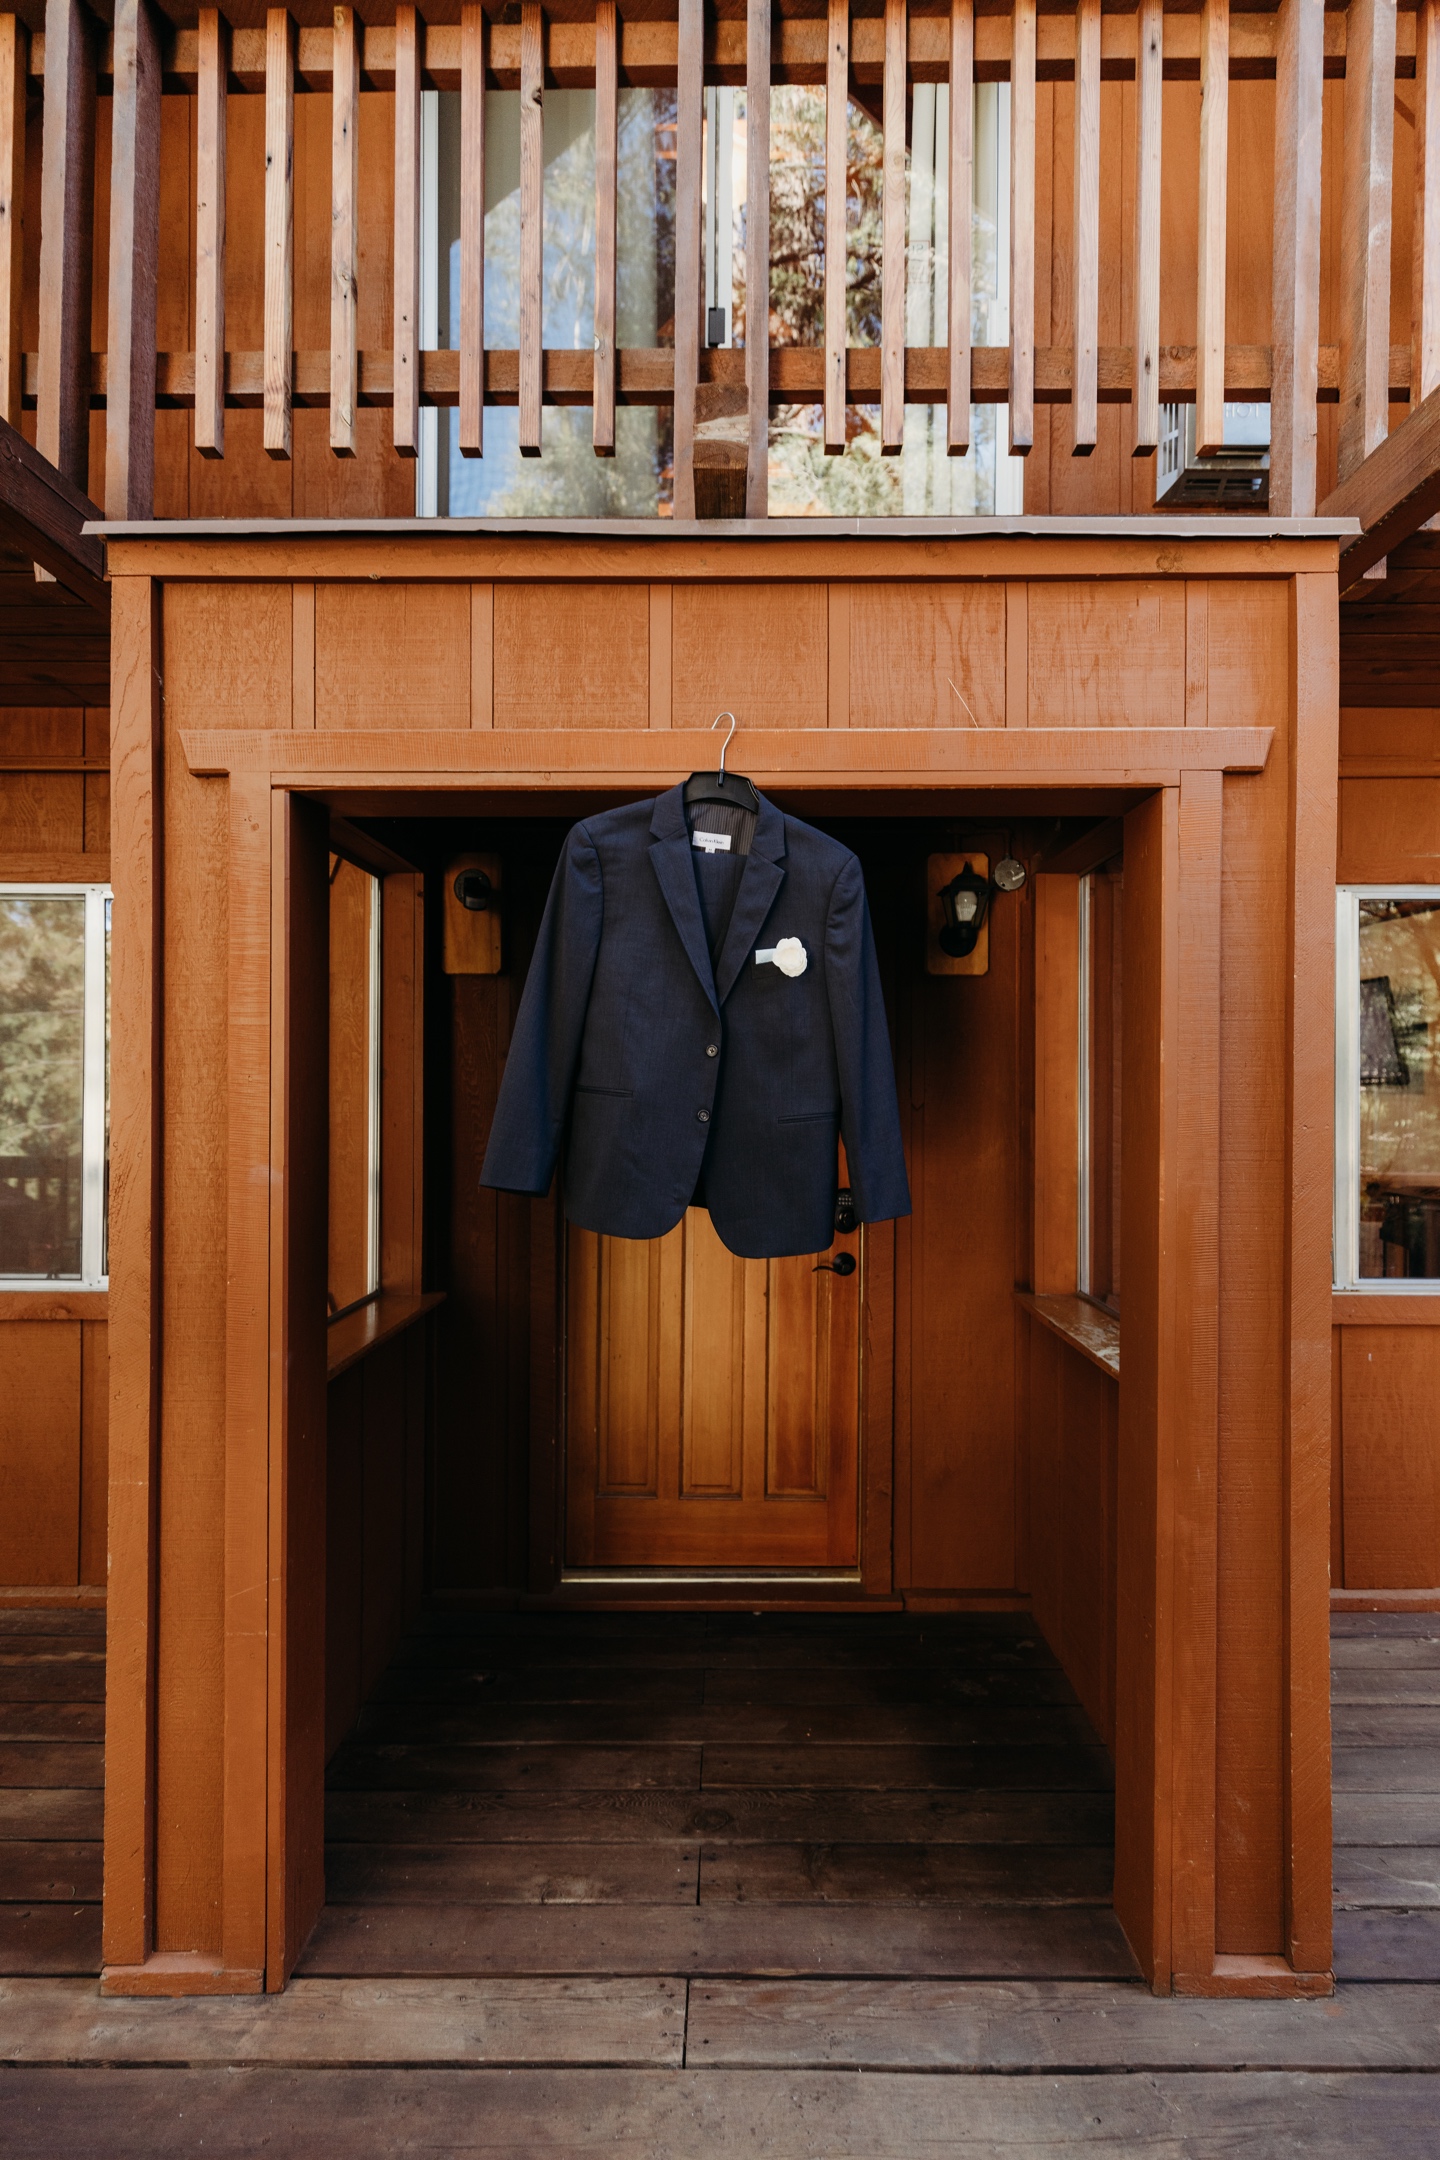 Suit jacket with flower hangs in wood cabin entry way.